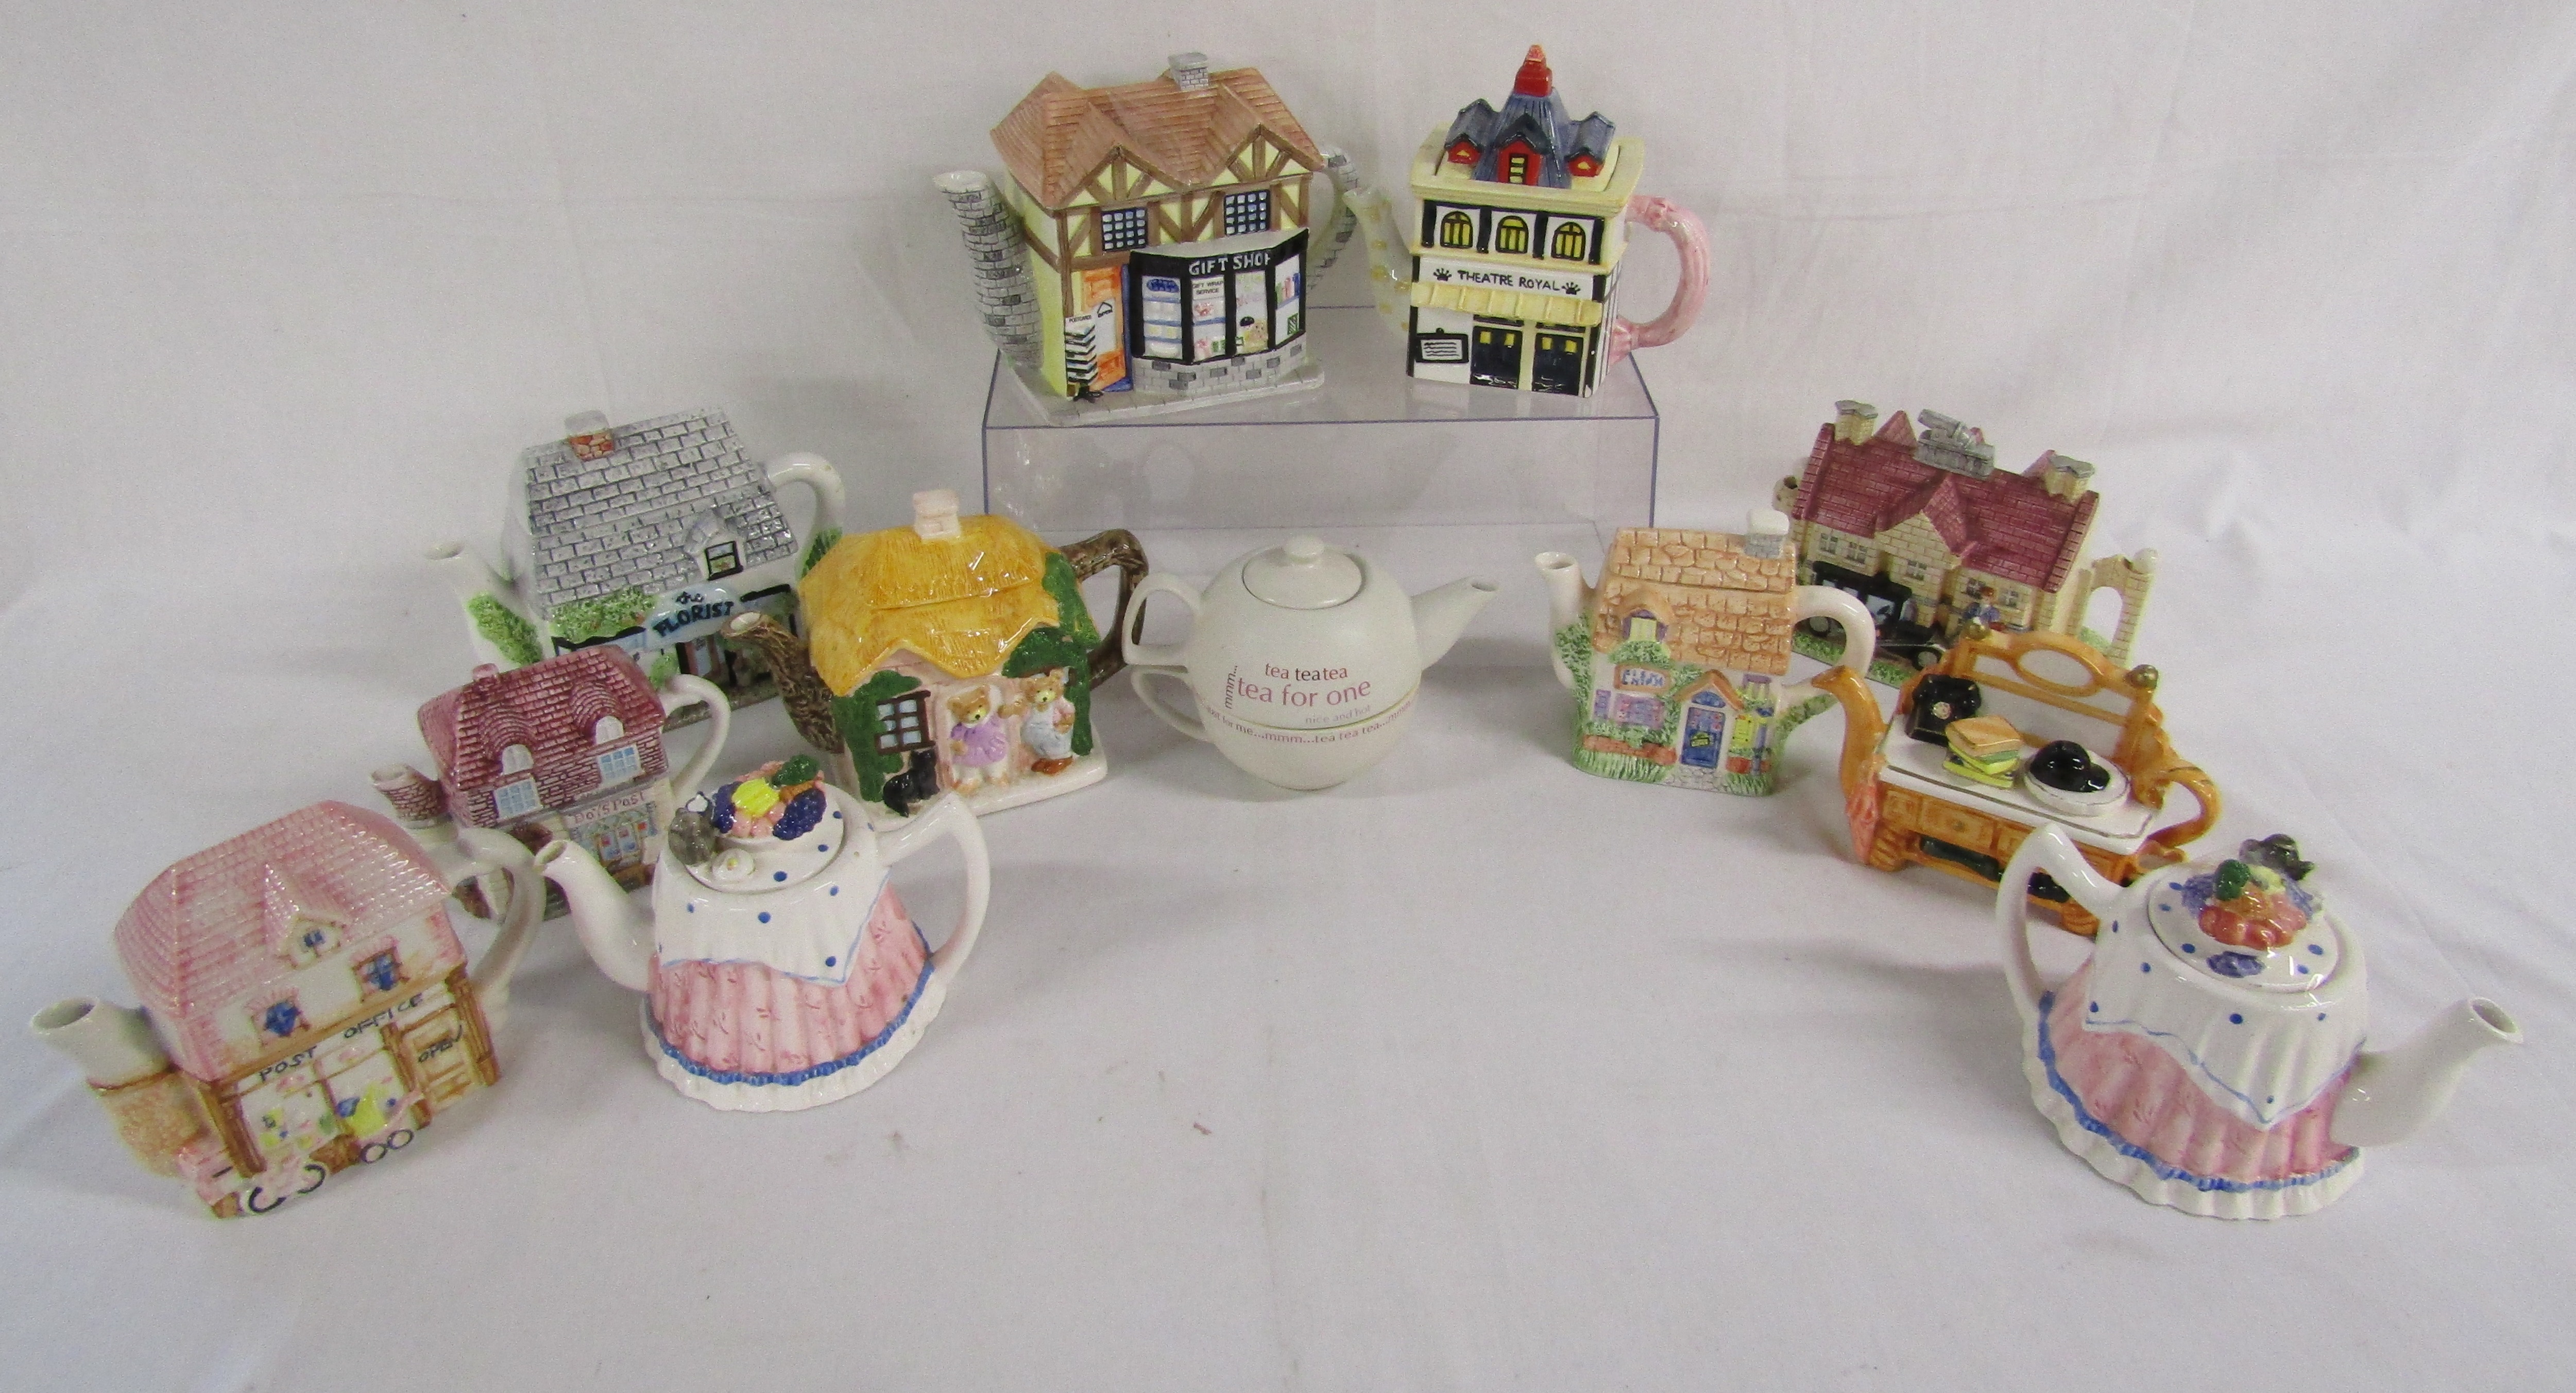 12 teapots includes Leonardo Antiques, theatre royal and country manor, florist, tea for one, The